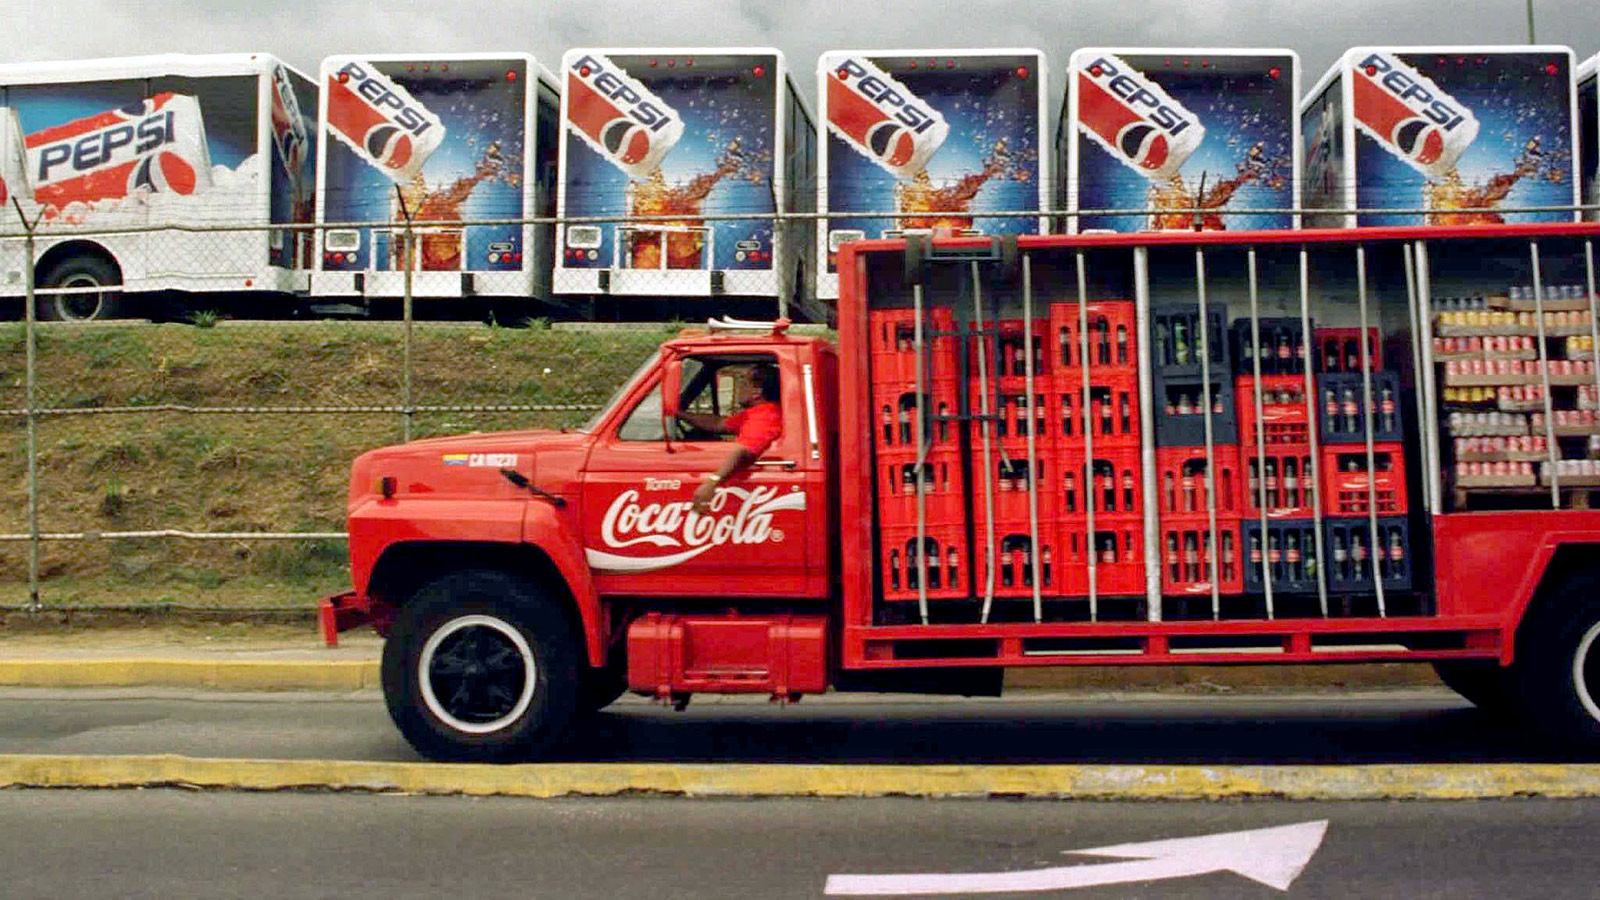 A Coca Cola truck passes in front of a Pepsi Co. parking lot filled with new Pepsi Cola trucks